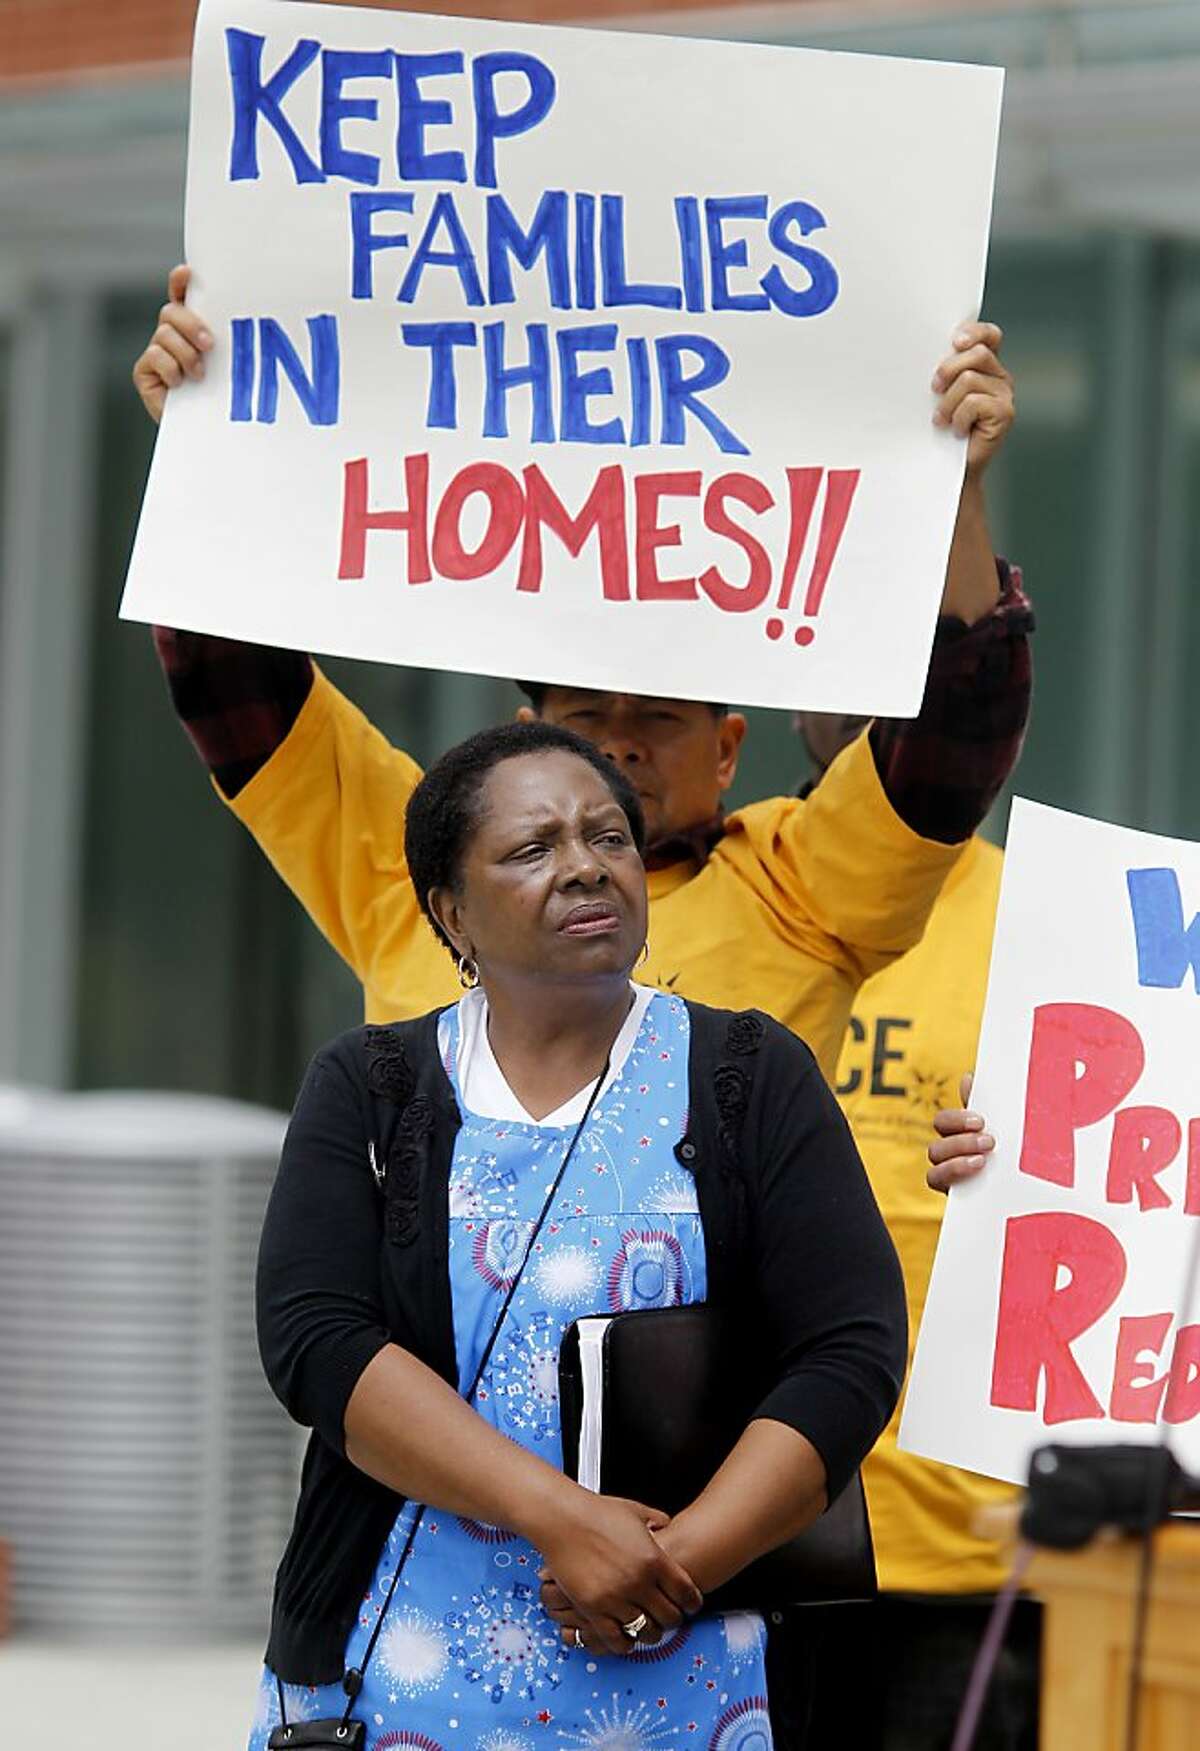 Doris Ducre, whose home is less more than the mortgage, spoke briefly of her plight Tuesday July 30, 2013. The city of Richmond, Calif. is teaming with private investors to buy up over 600 mortgages in the city from large banks to help homeowners redo their loans so they can stay in their homes.